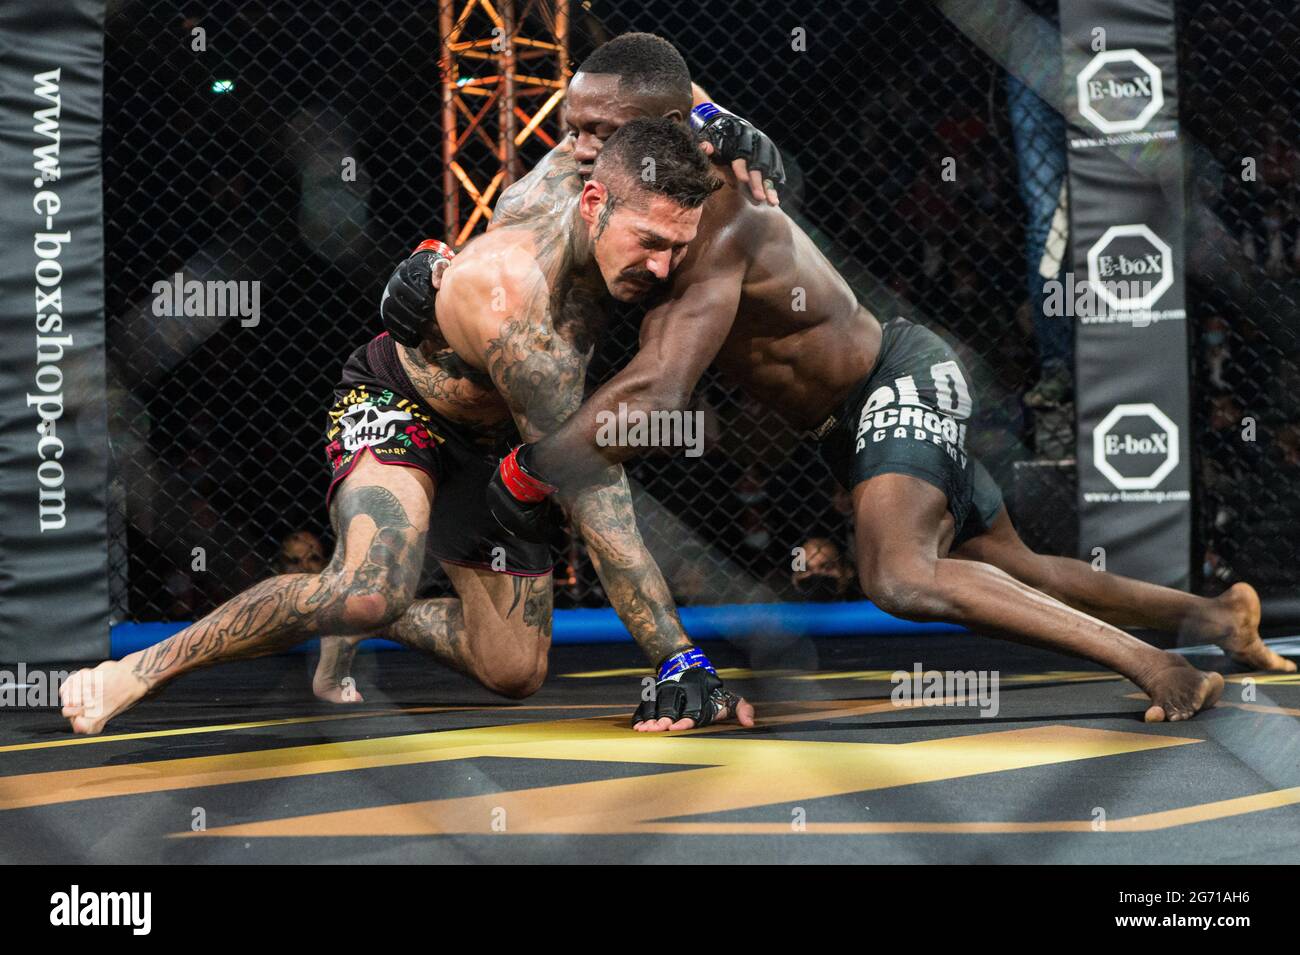 Paris, France. 09th July, 2021. French MMA fighter Alix Jeanguillaume (L.)  fights against French fighter Onefel Mackoumbou in the under 70kgs category  of the first edition of the MMA Hexagone, a Mixed